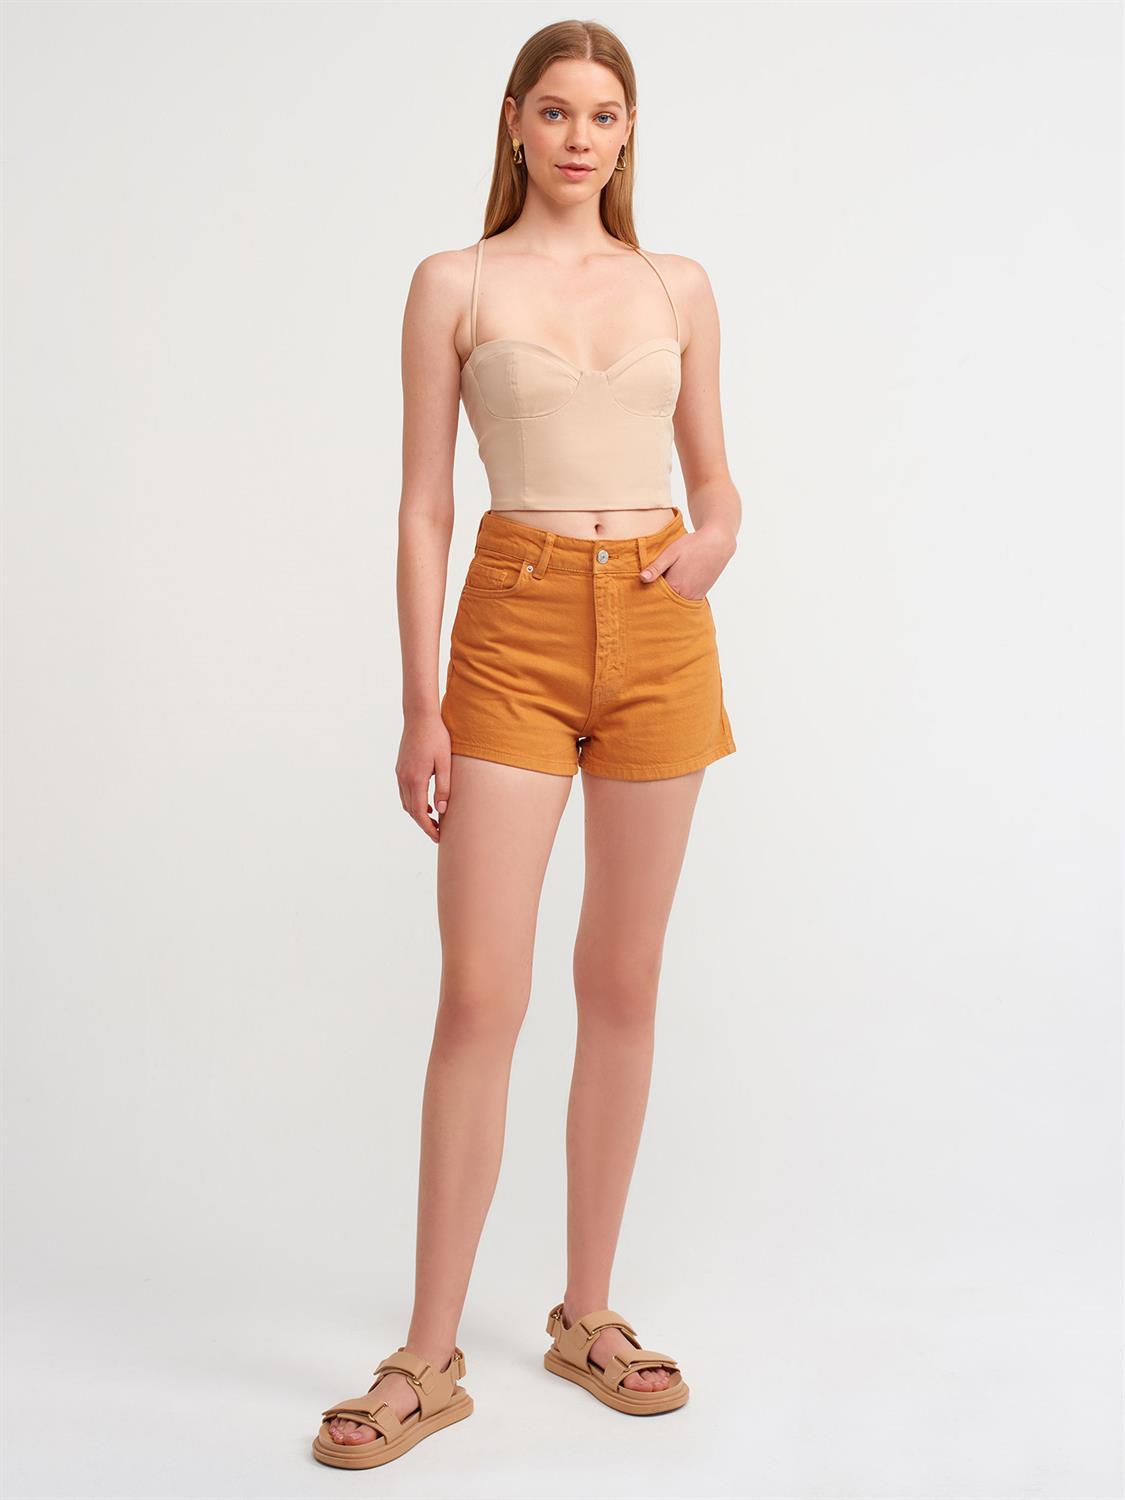 A wholesale clothing model wears Shorts - Mustard, Turkish wholesale Shorts of Dilvin